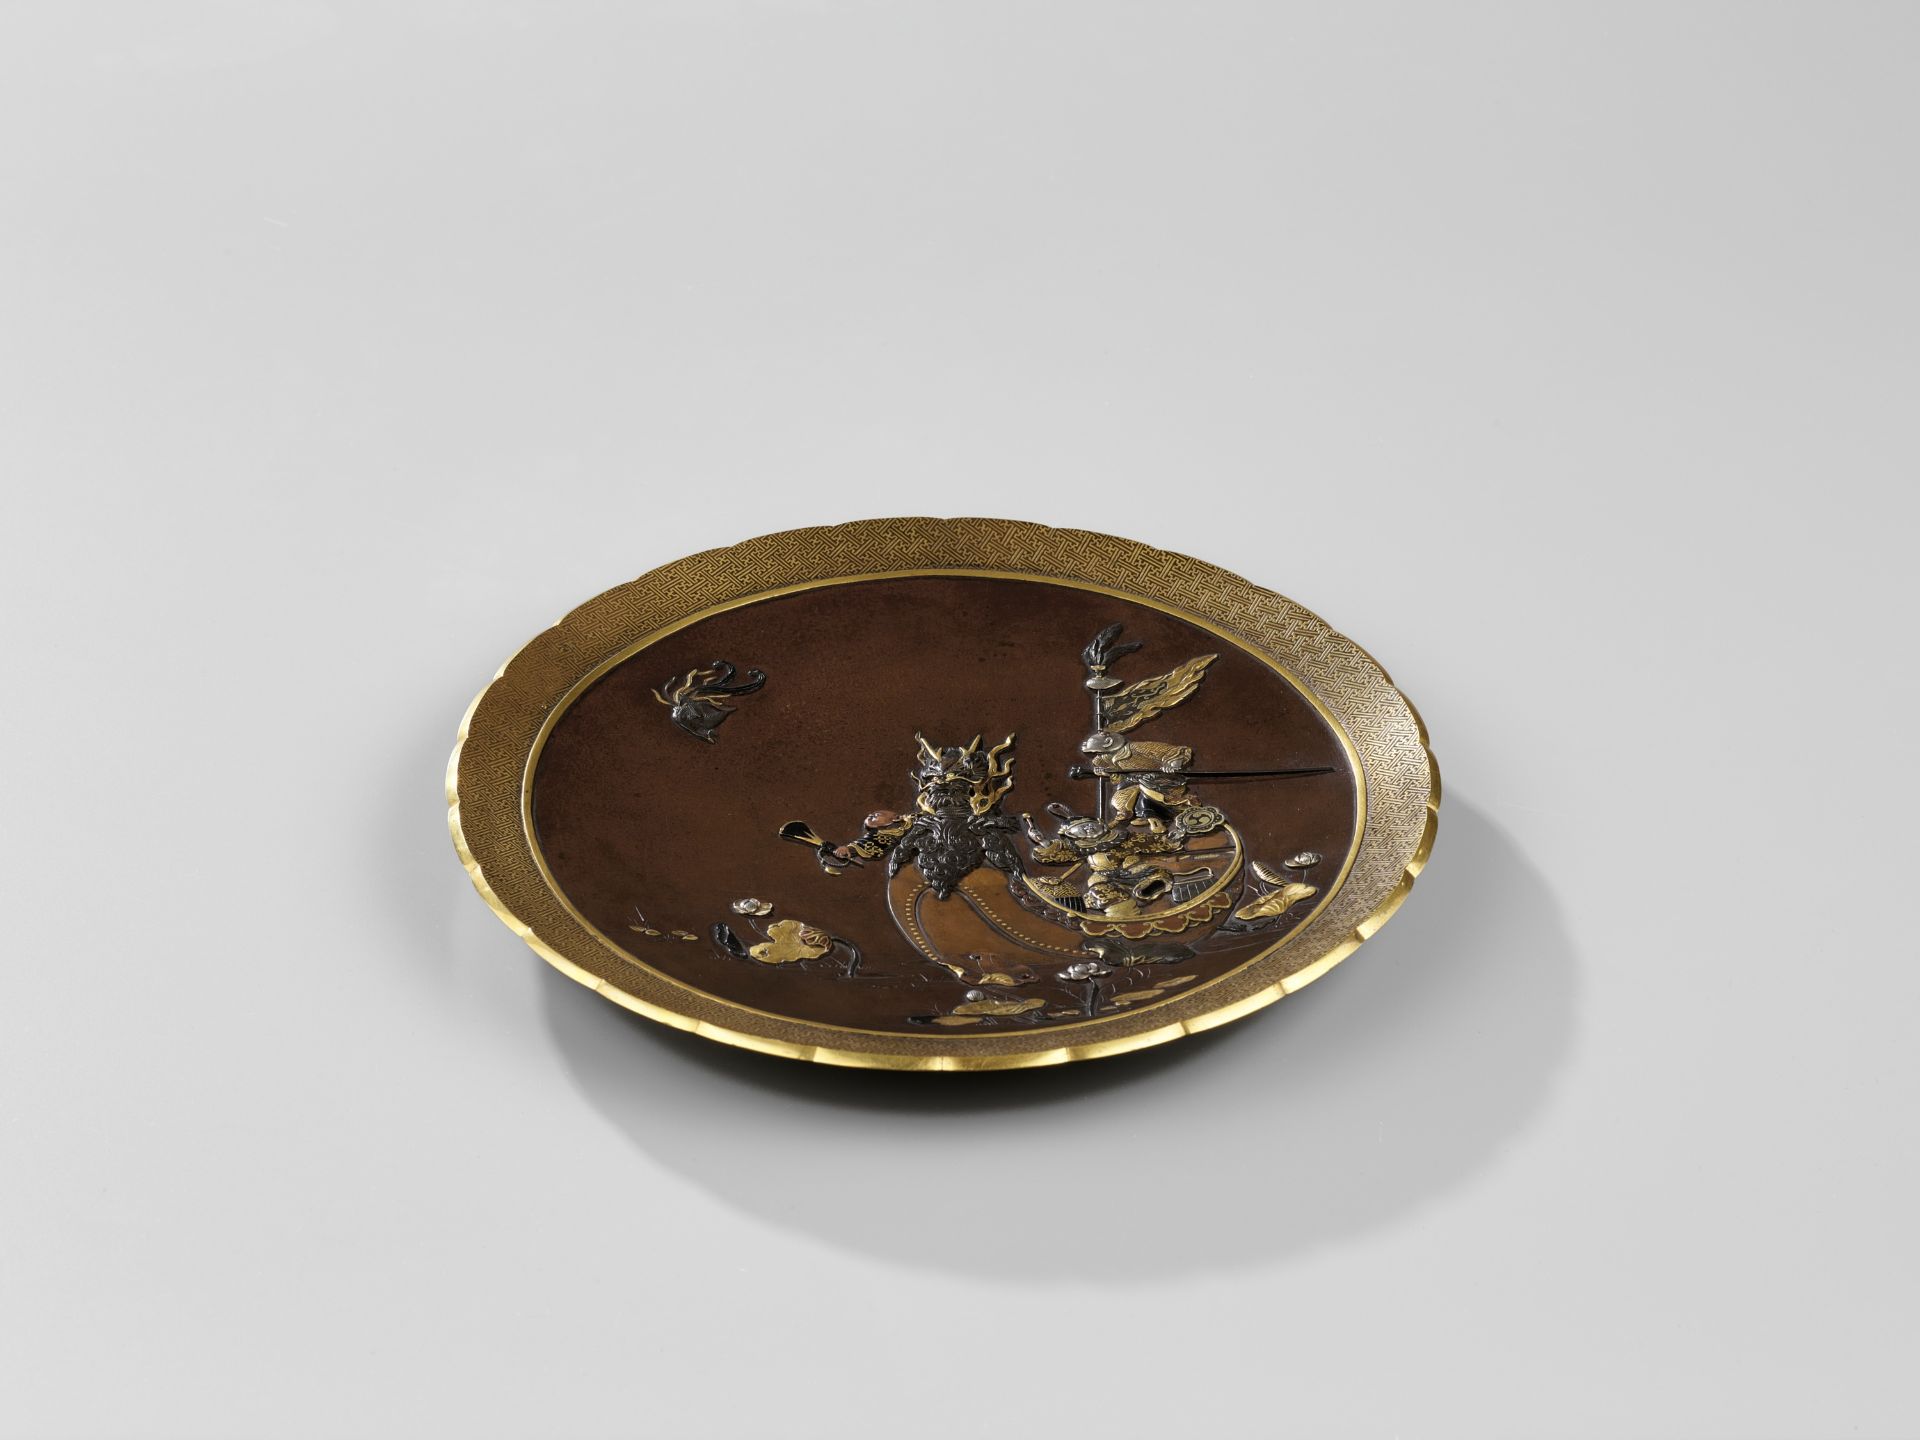 INOUE: A SUPERB INLAID BRONZE DISH DEPICTING BOYS ON A DRAGON BOAT - Image 2 of 6